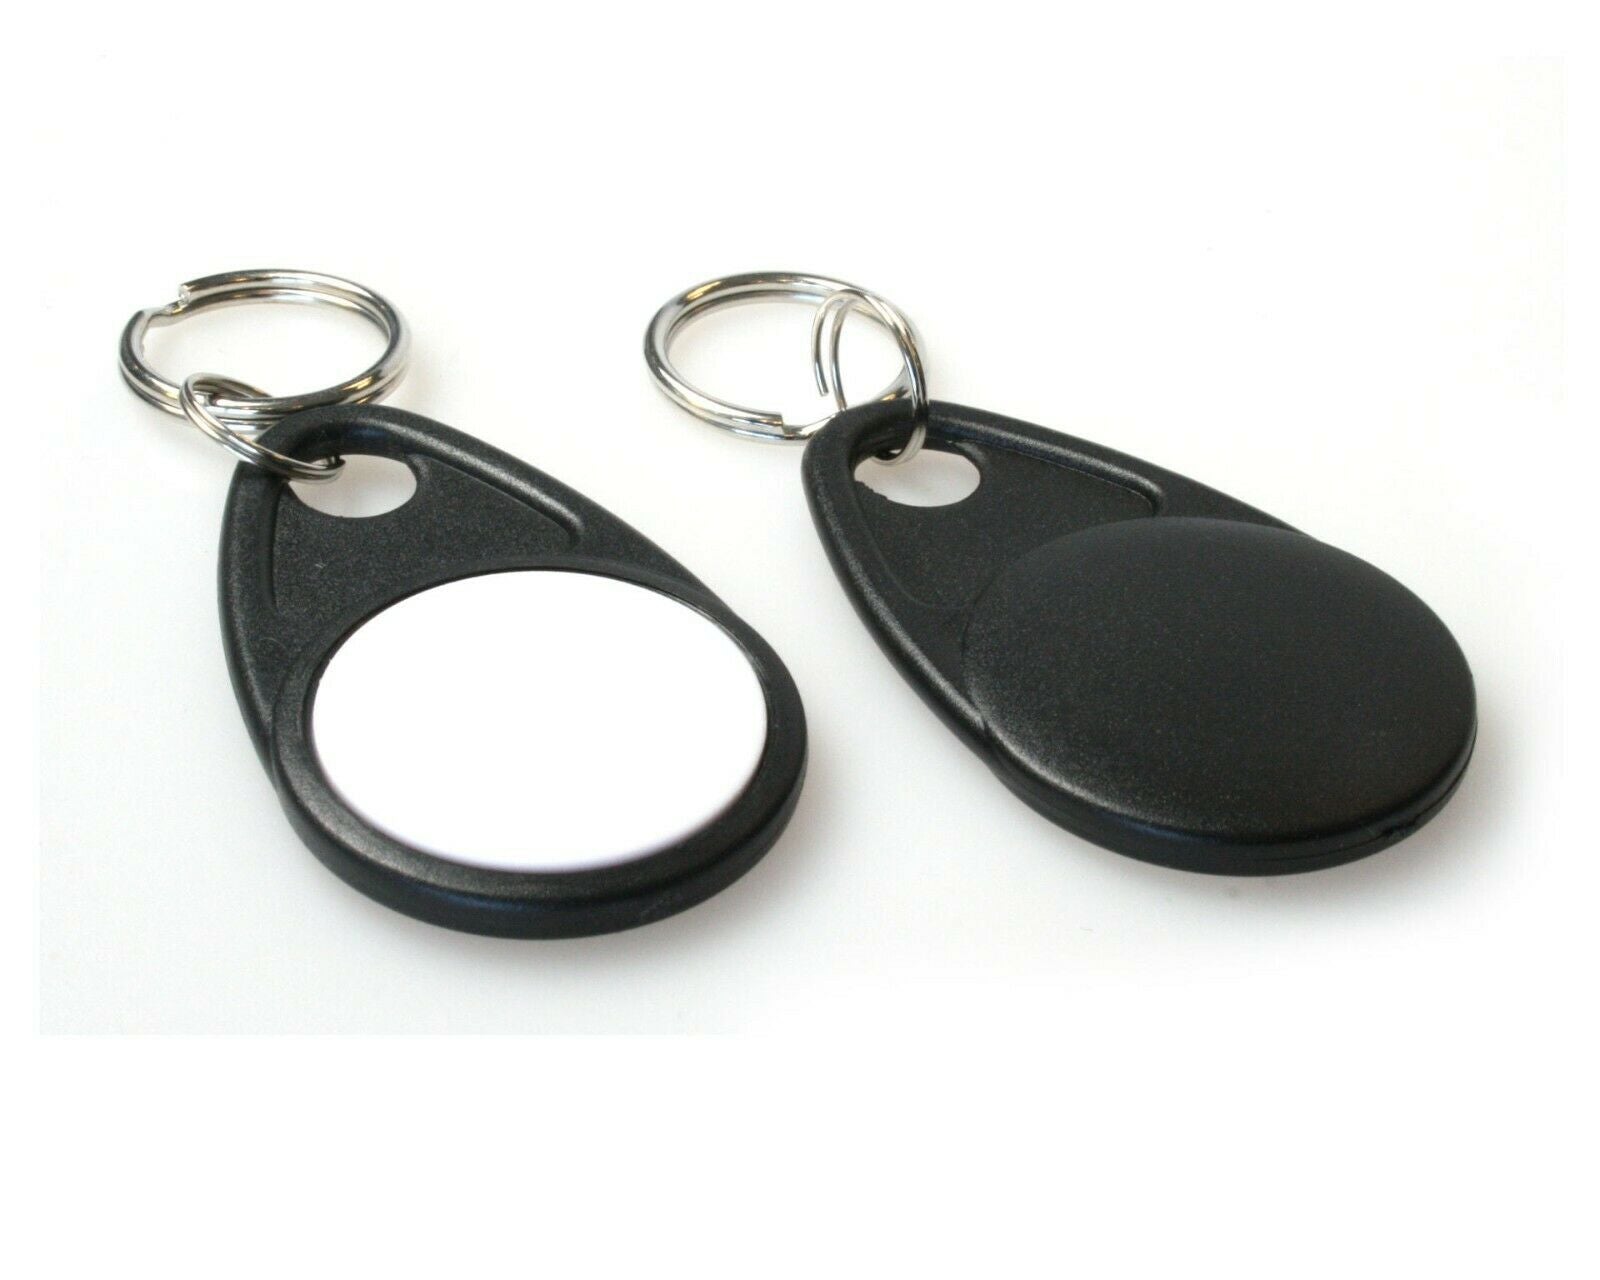 Black and White MIFARE Classic® Key Fobs (Pack of 100)